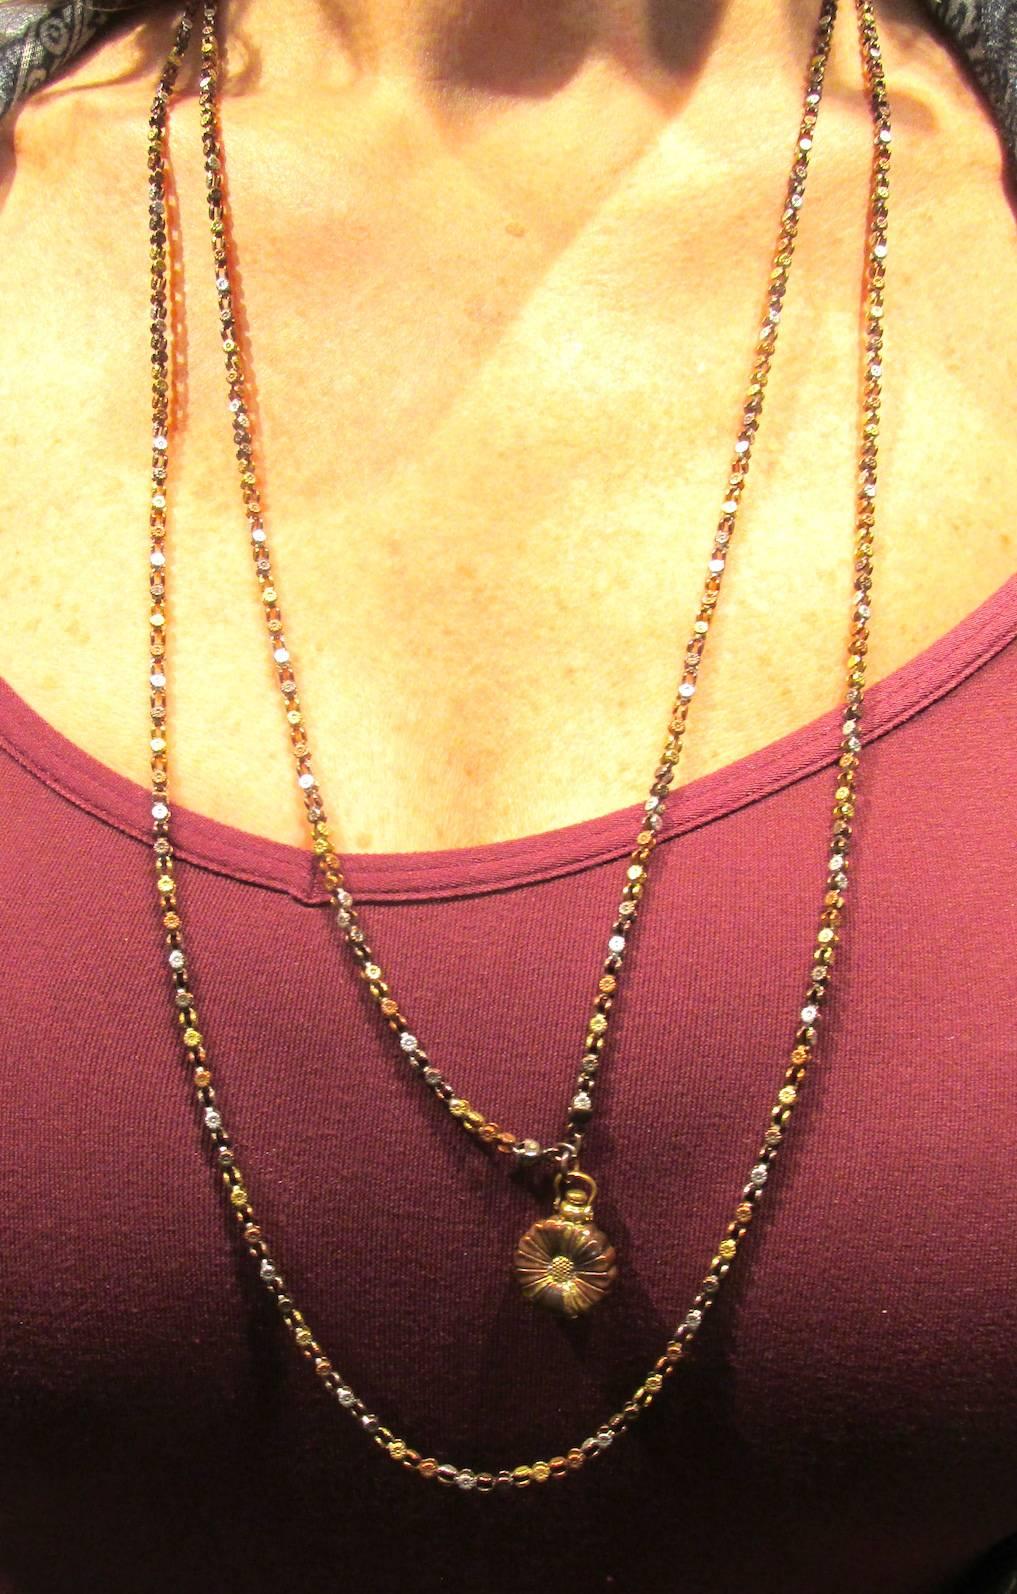 Antique Mixed Metals Shakudo Chain with Drop 1